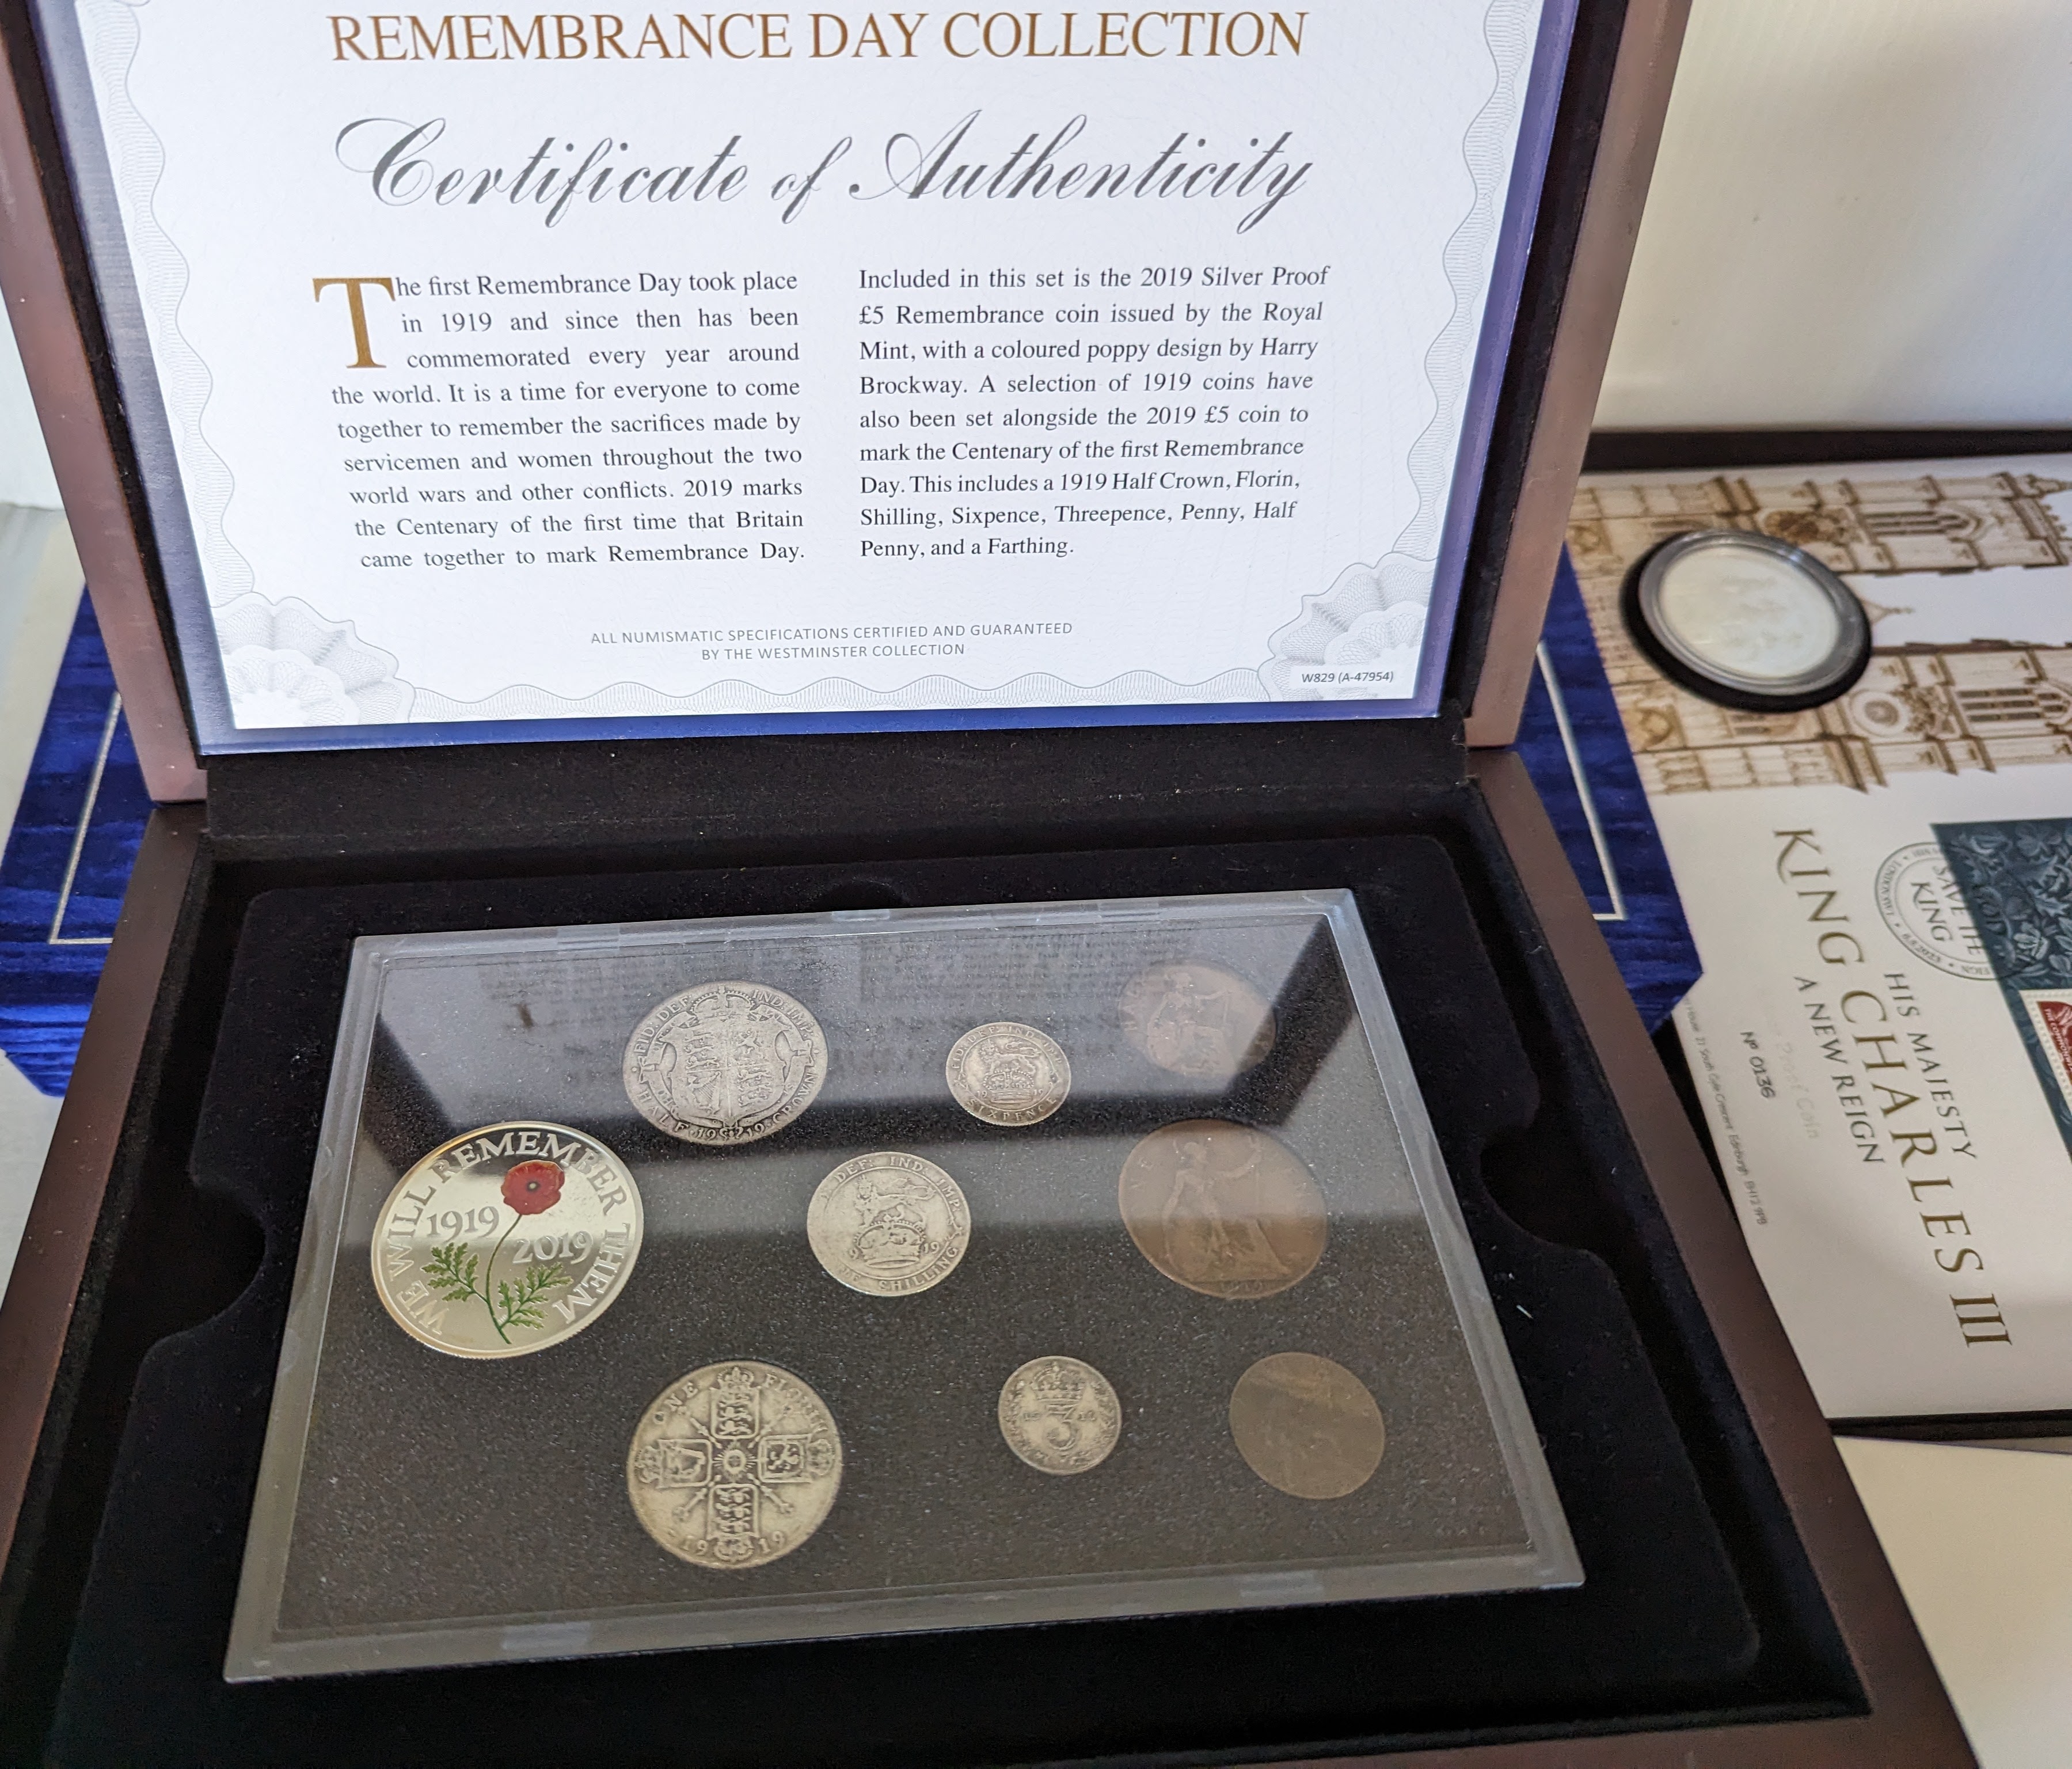 HRH Prince Charles 70th Birthday Heritage Coin and Stamp Set, limited edition no. 210/499 - Image 6 of 7